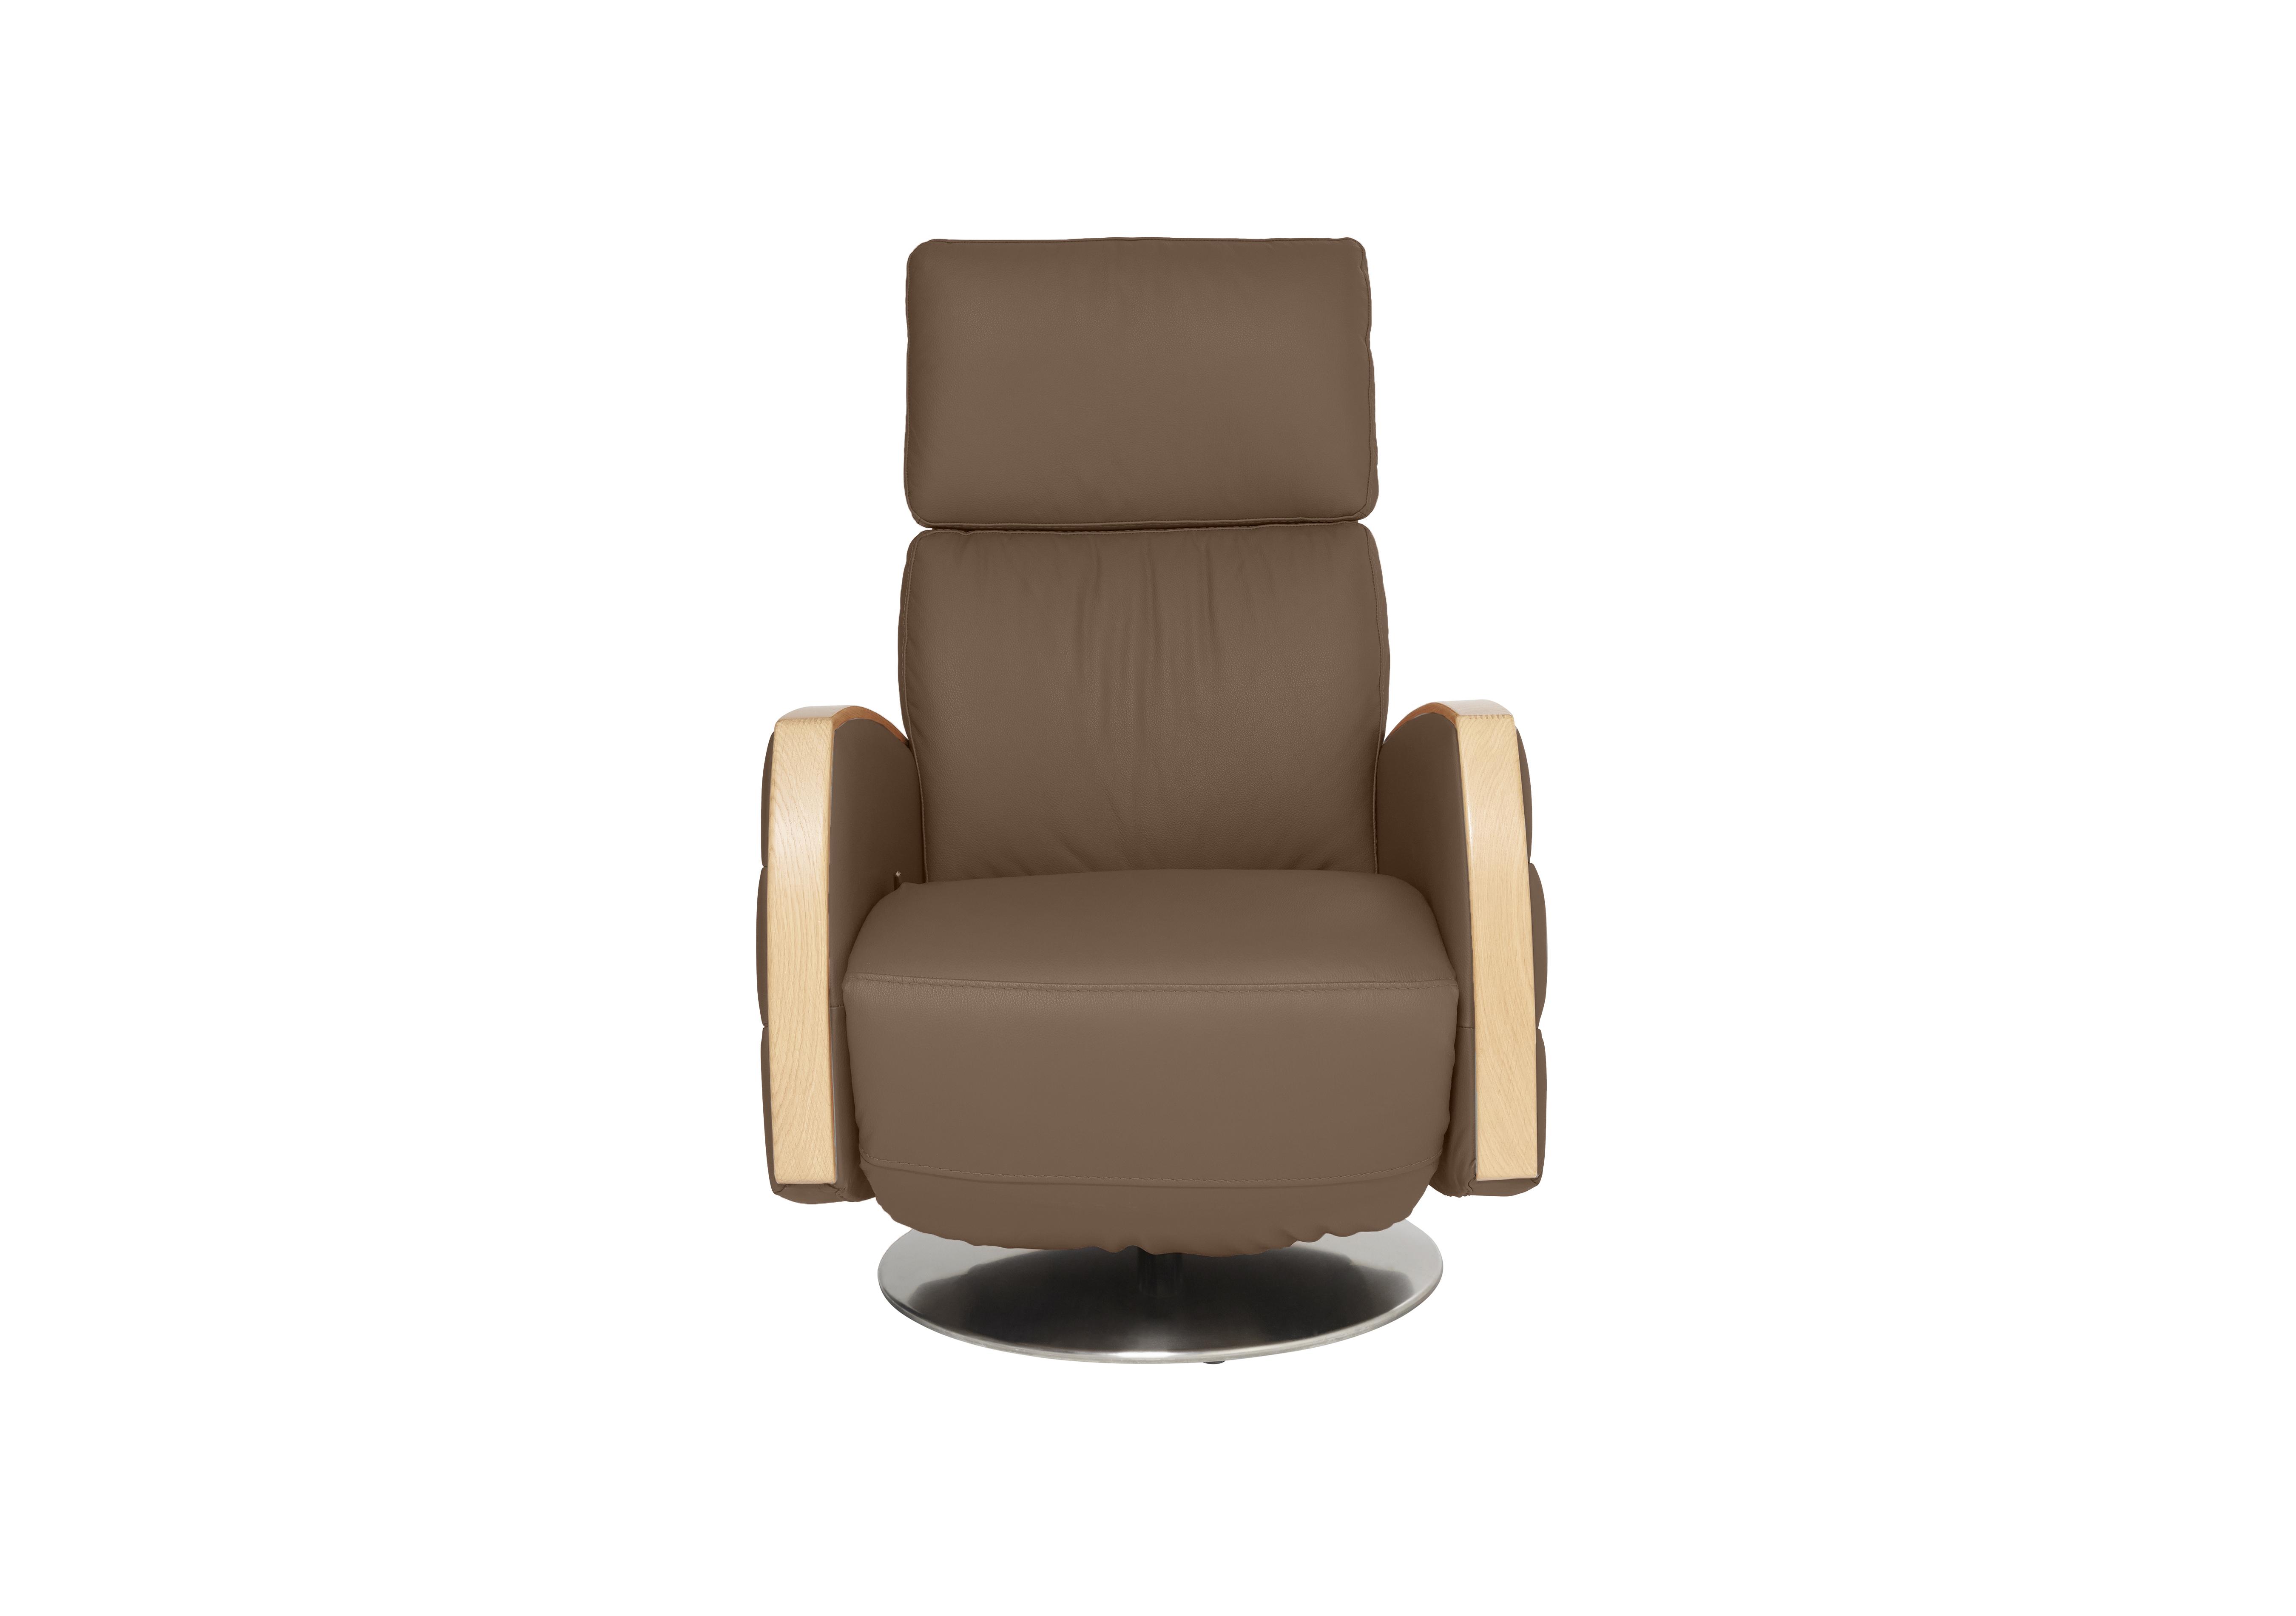 Noto Leather Recliner Chair in L953 Pepper on Furniture Village